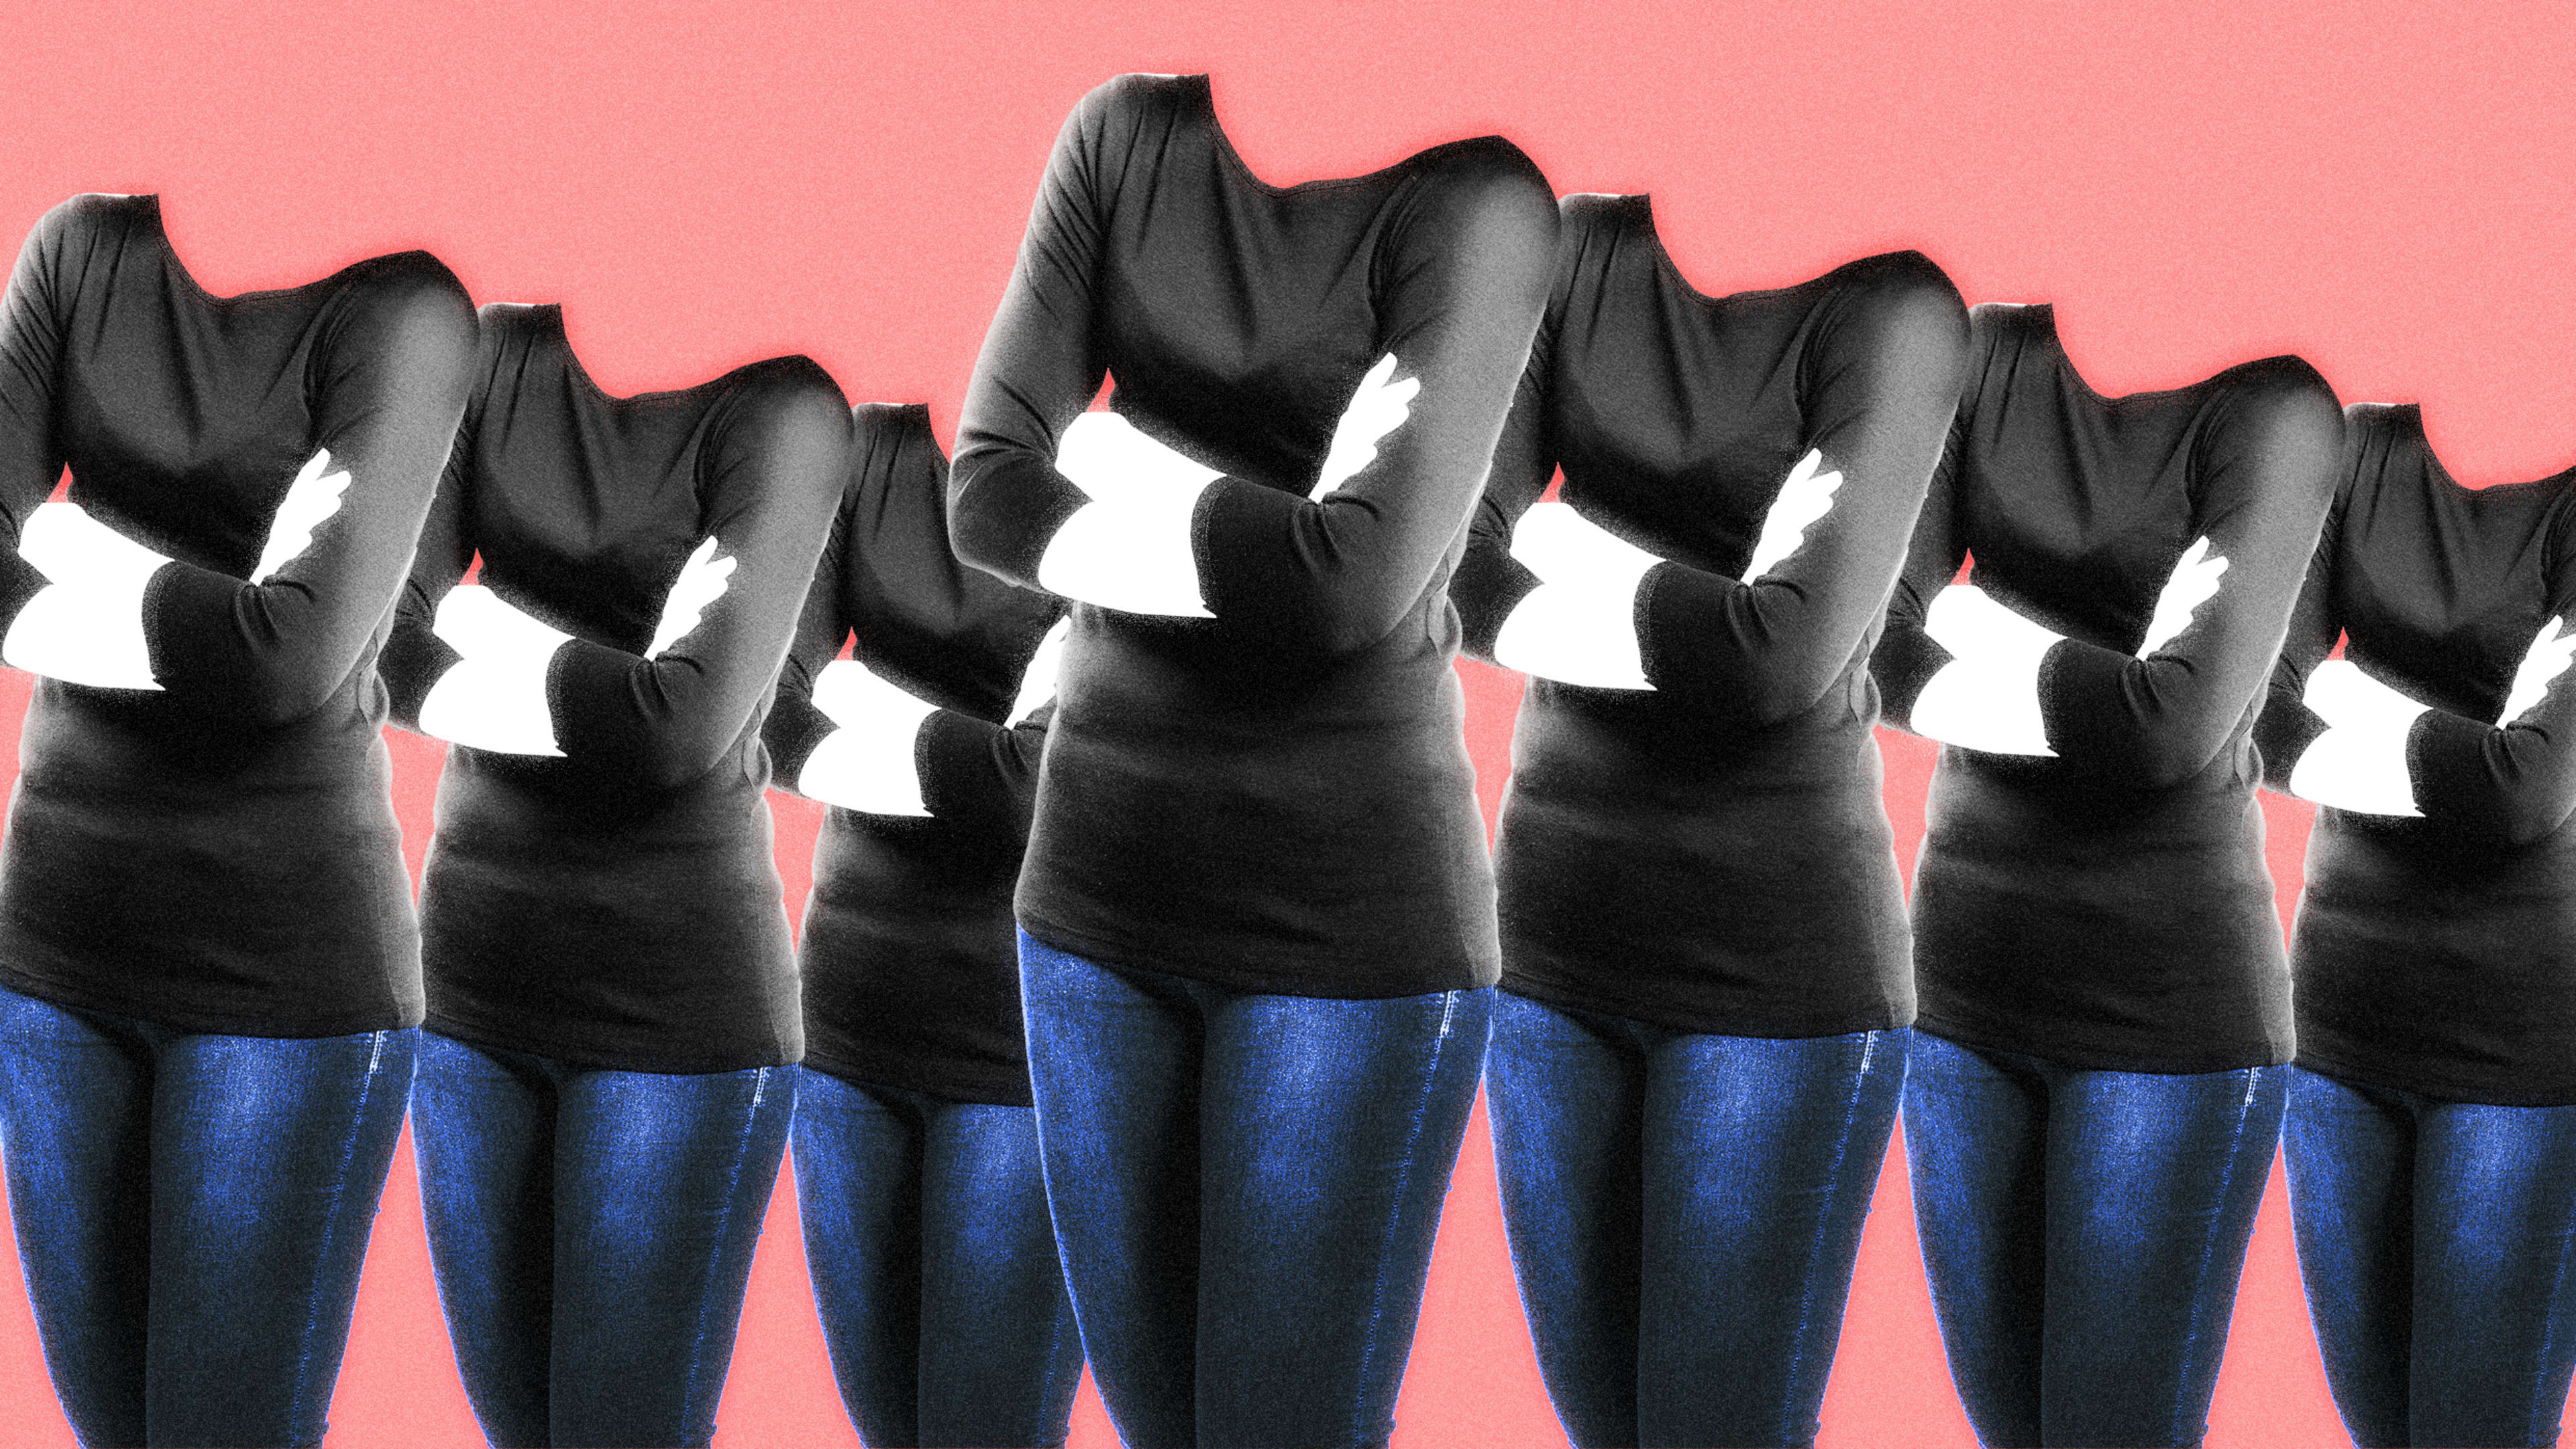 We asked two of our female editors to wear the same thing every day. Here’s what happened